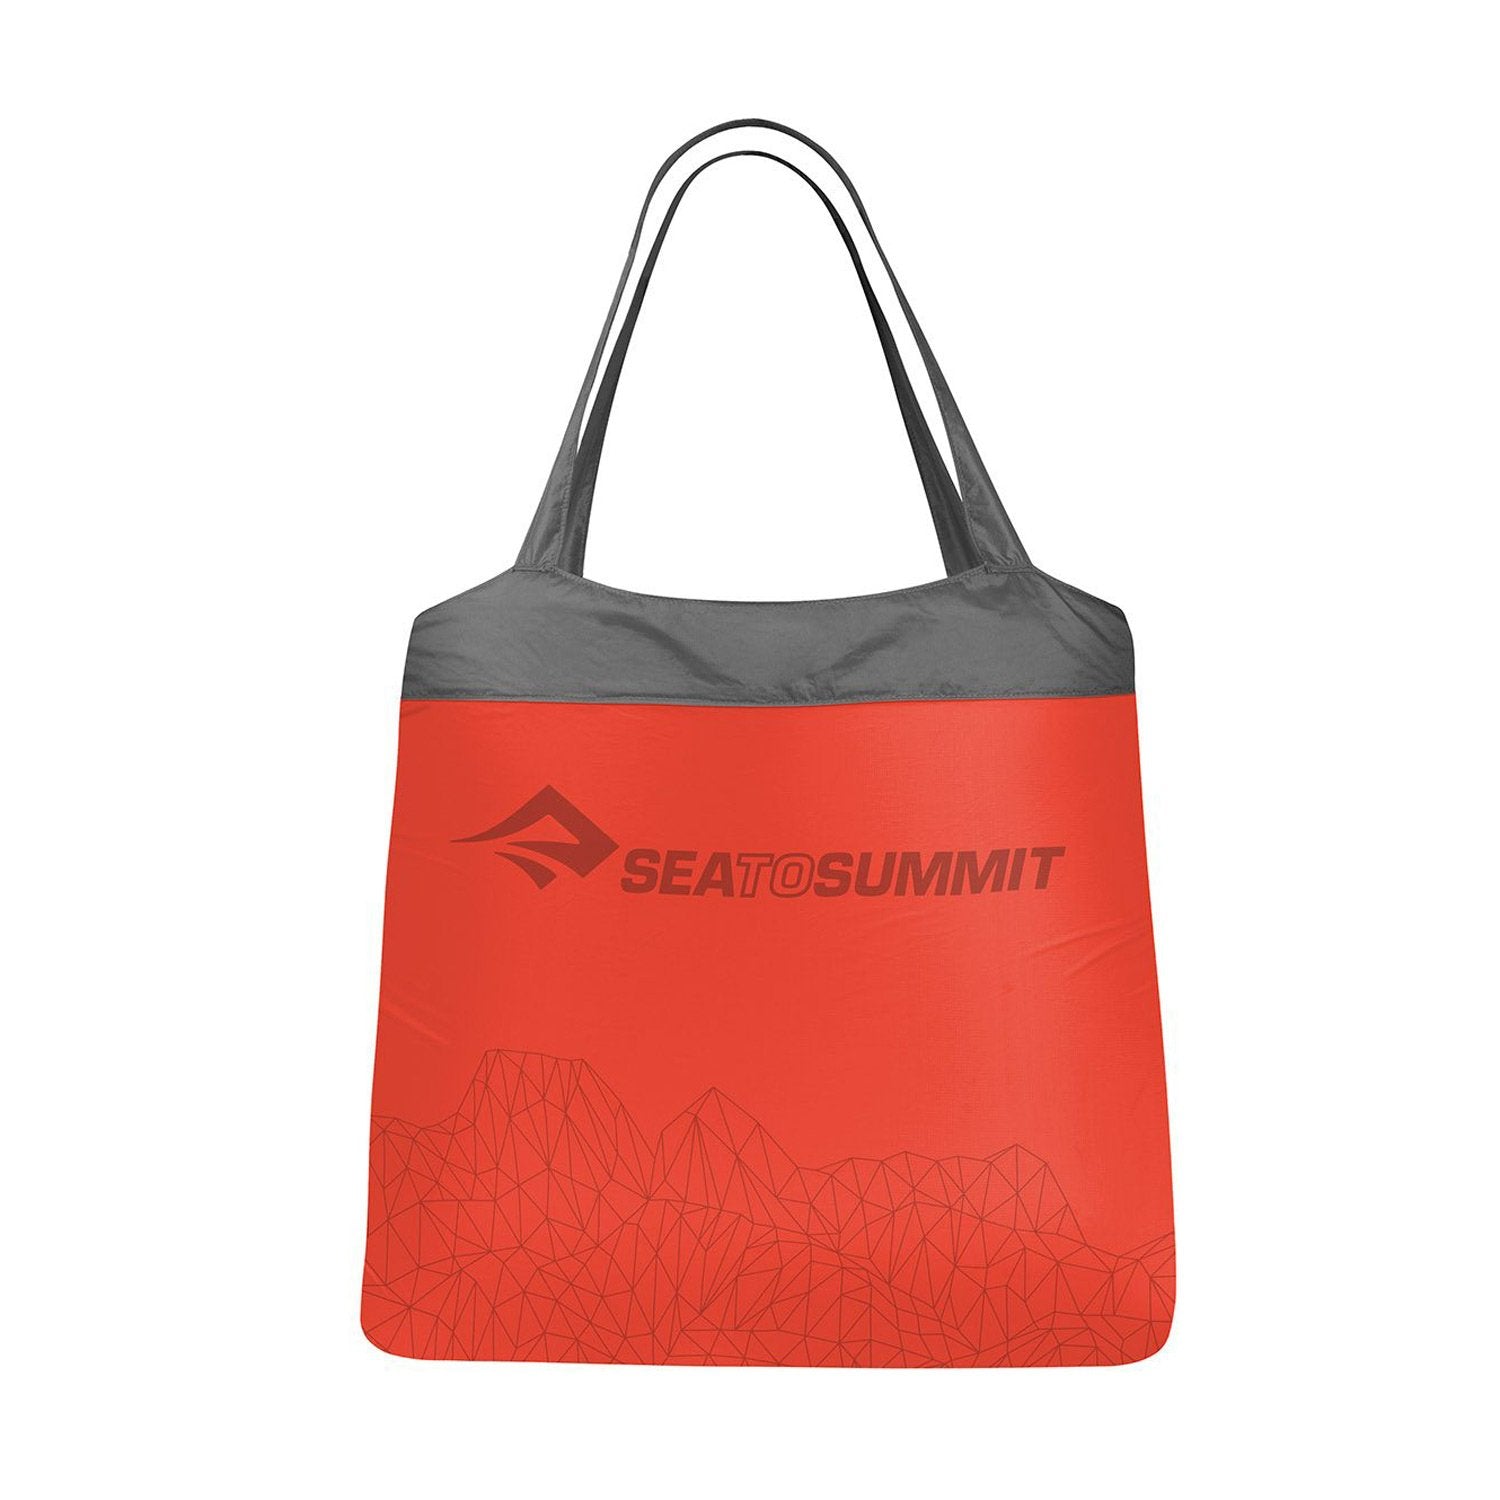 Sea To Summit Ultra Sil Nano 25L Shopping Bag Bags, Packs and Cases Sea To Summit Red Tactical Gear Supplier Tactical Distributors Australia